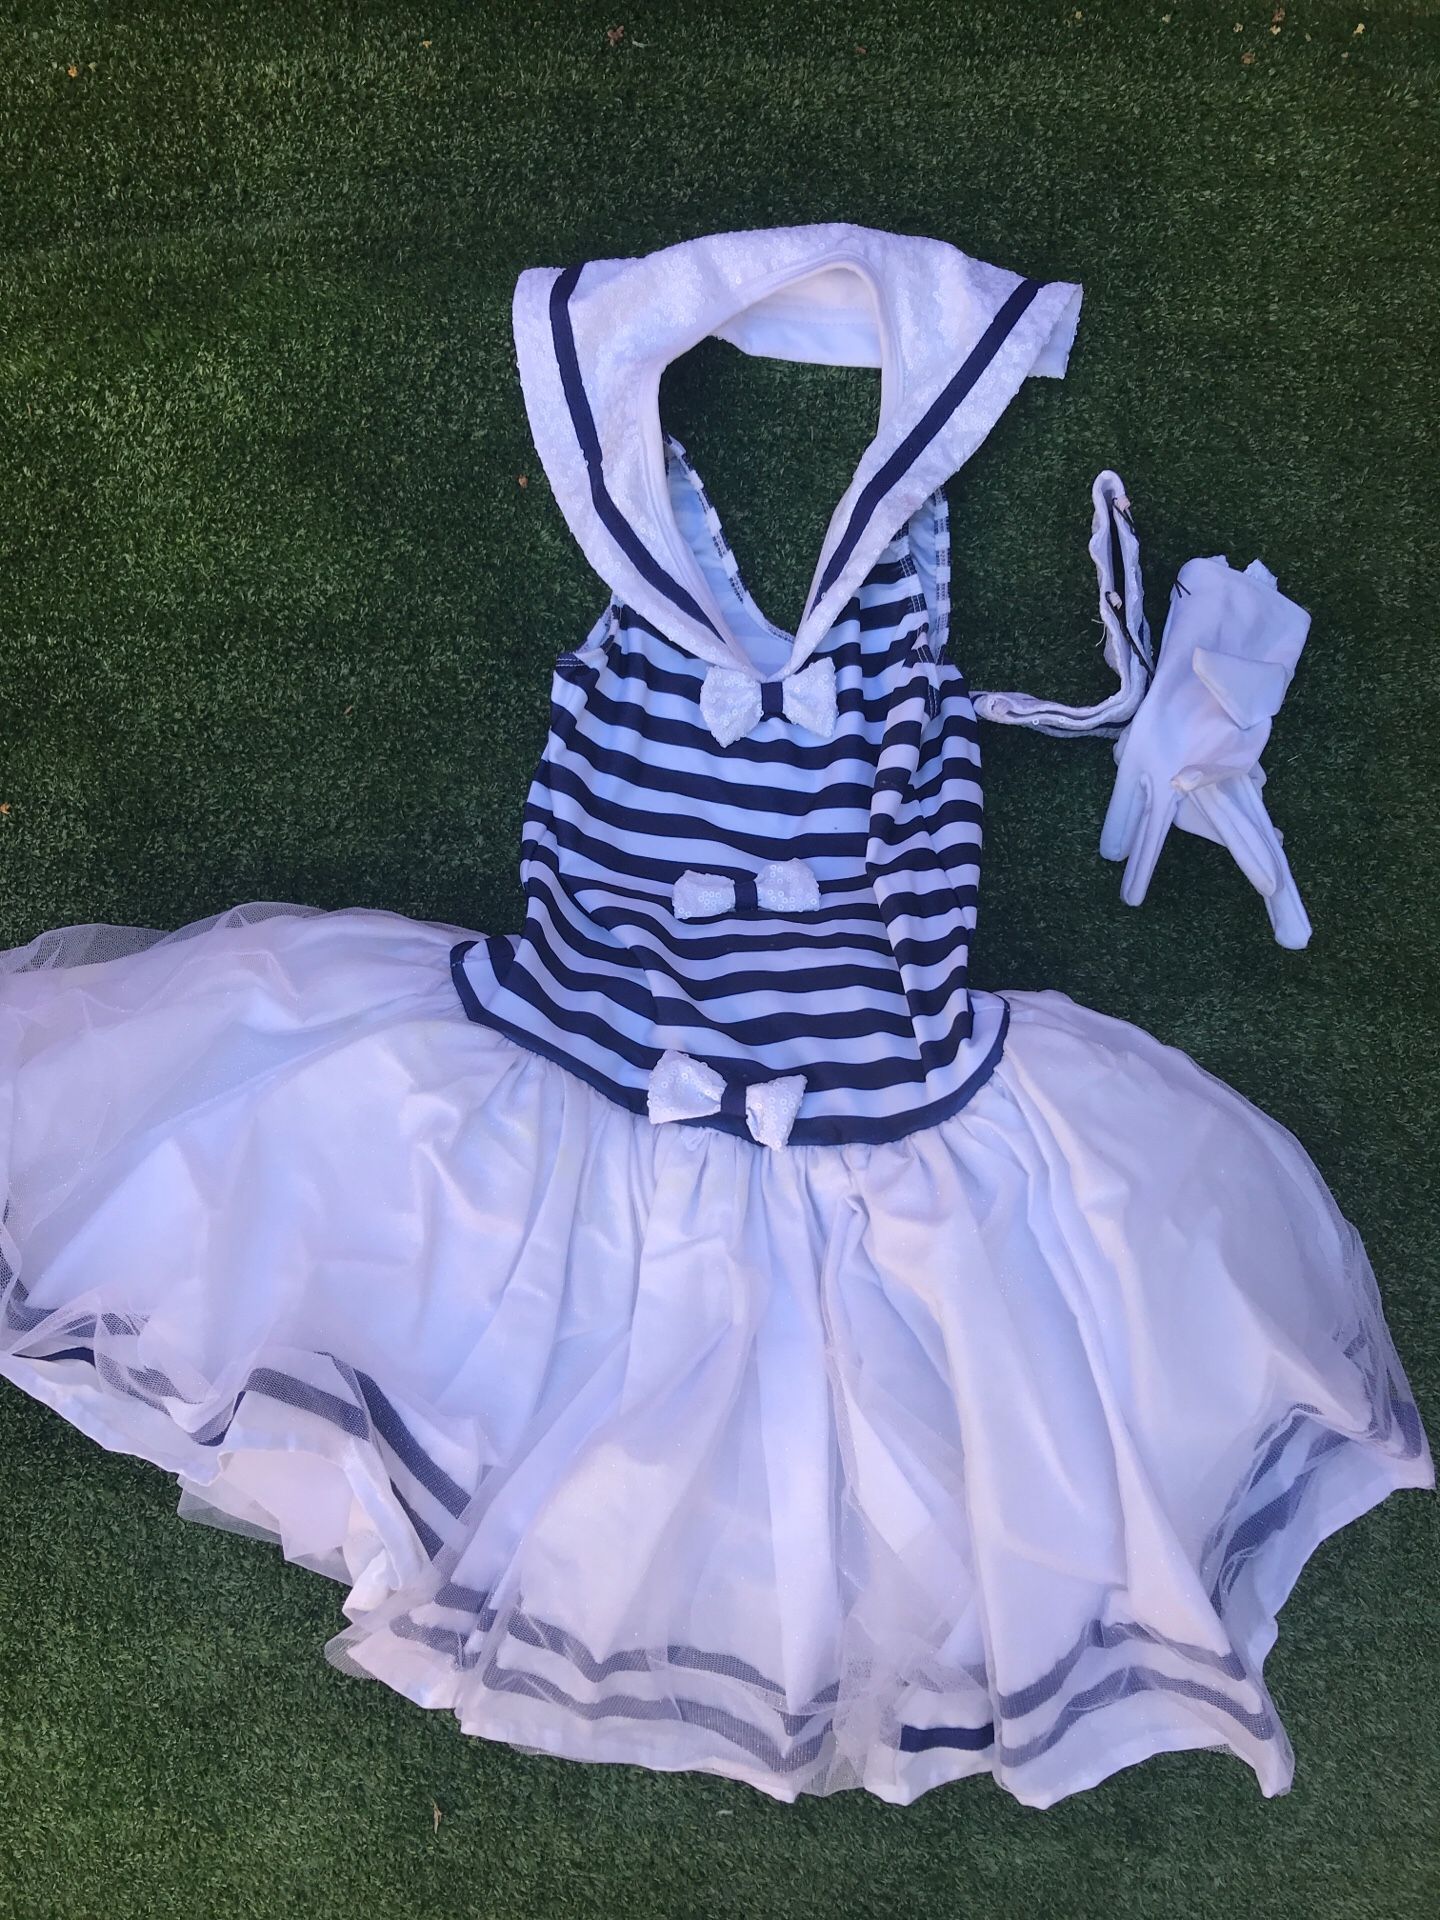 Navy girl costume for 6 year old